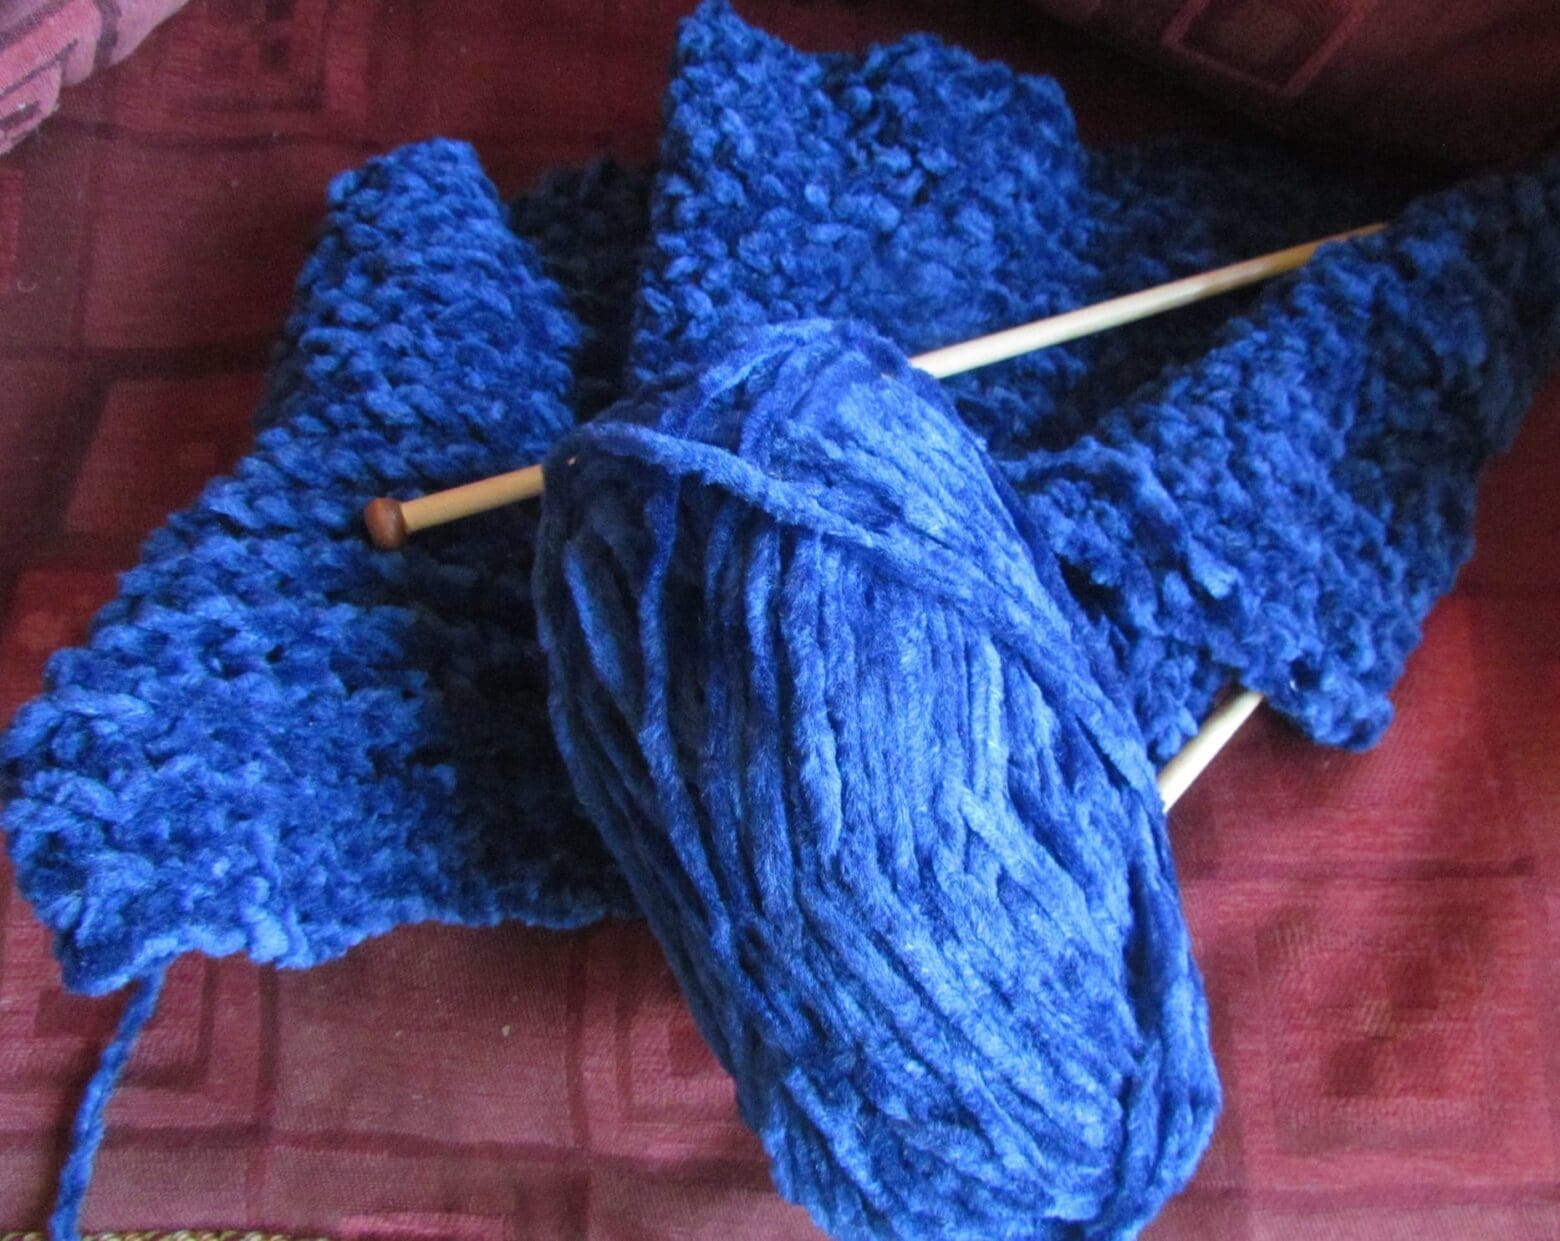 The makings of an infinity scarf using a brioche stitch 